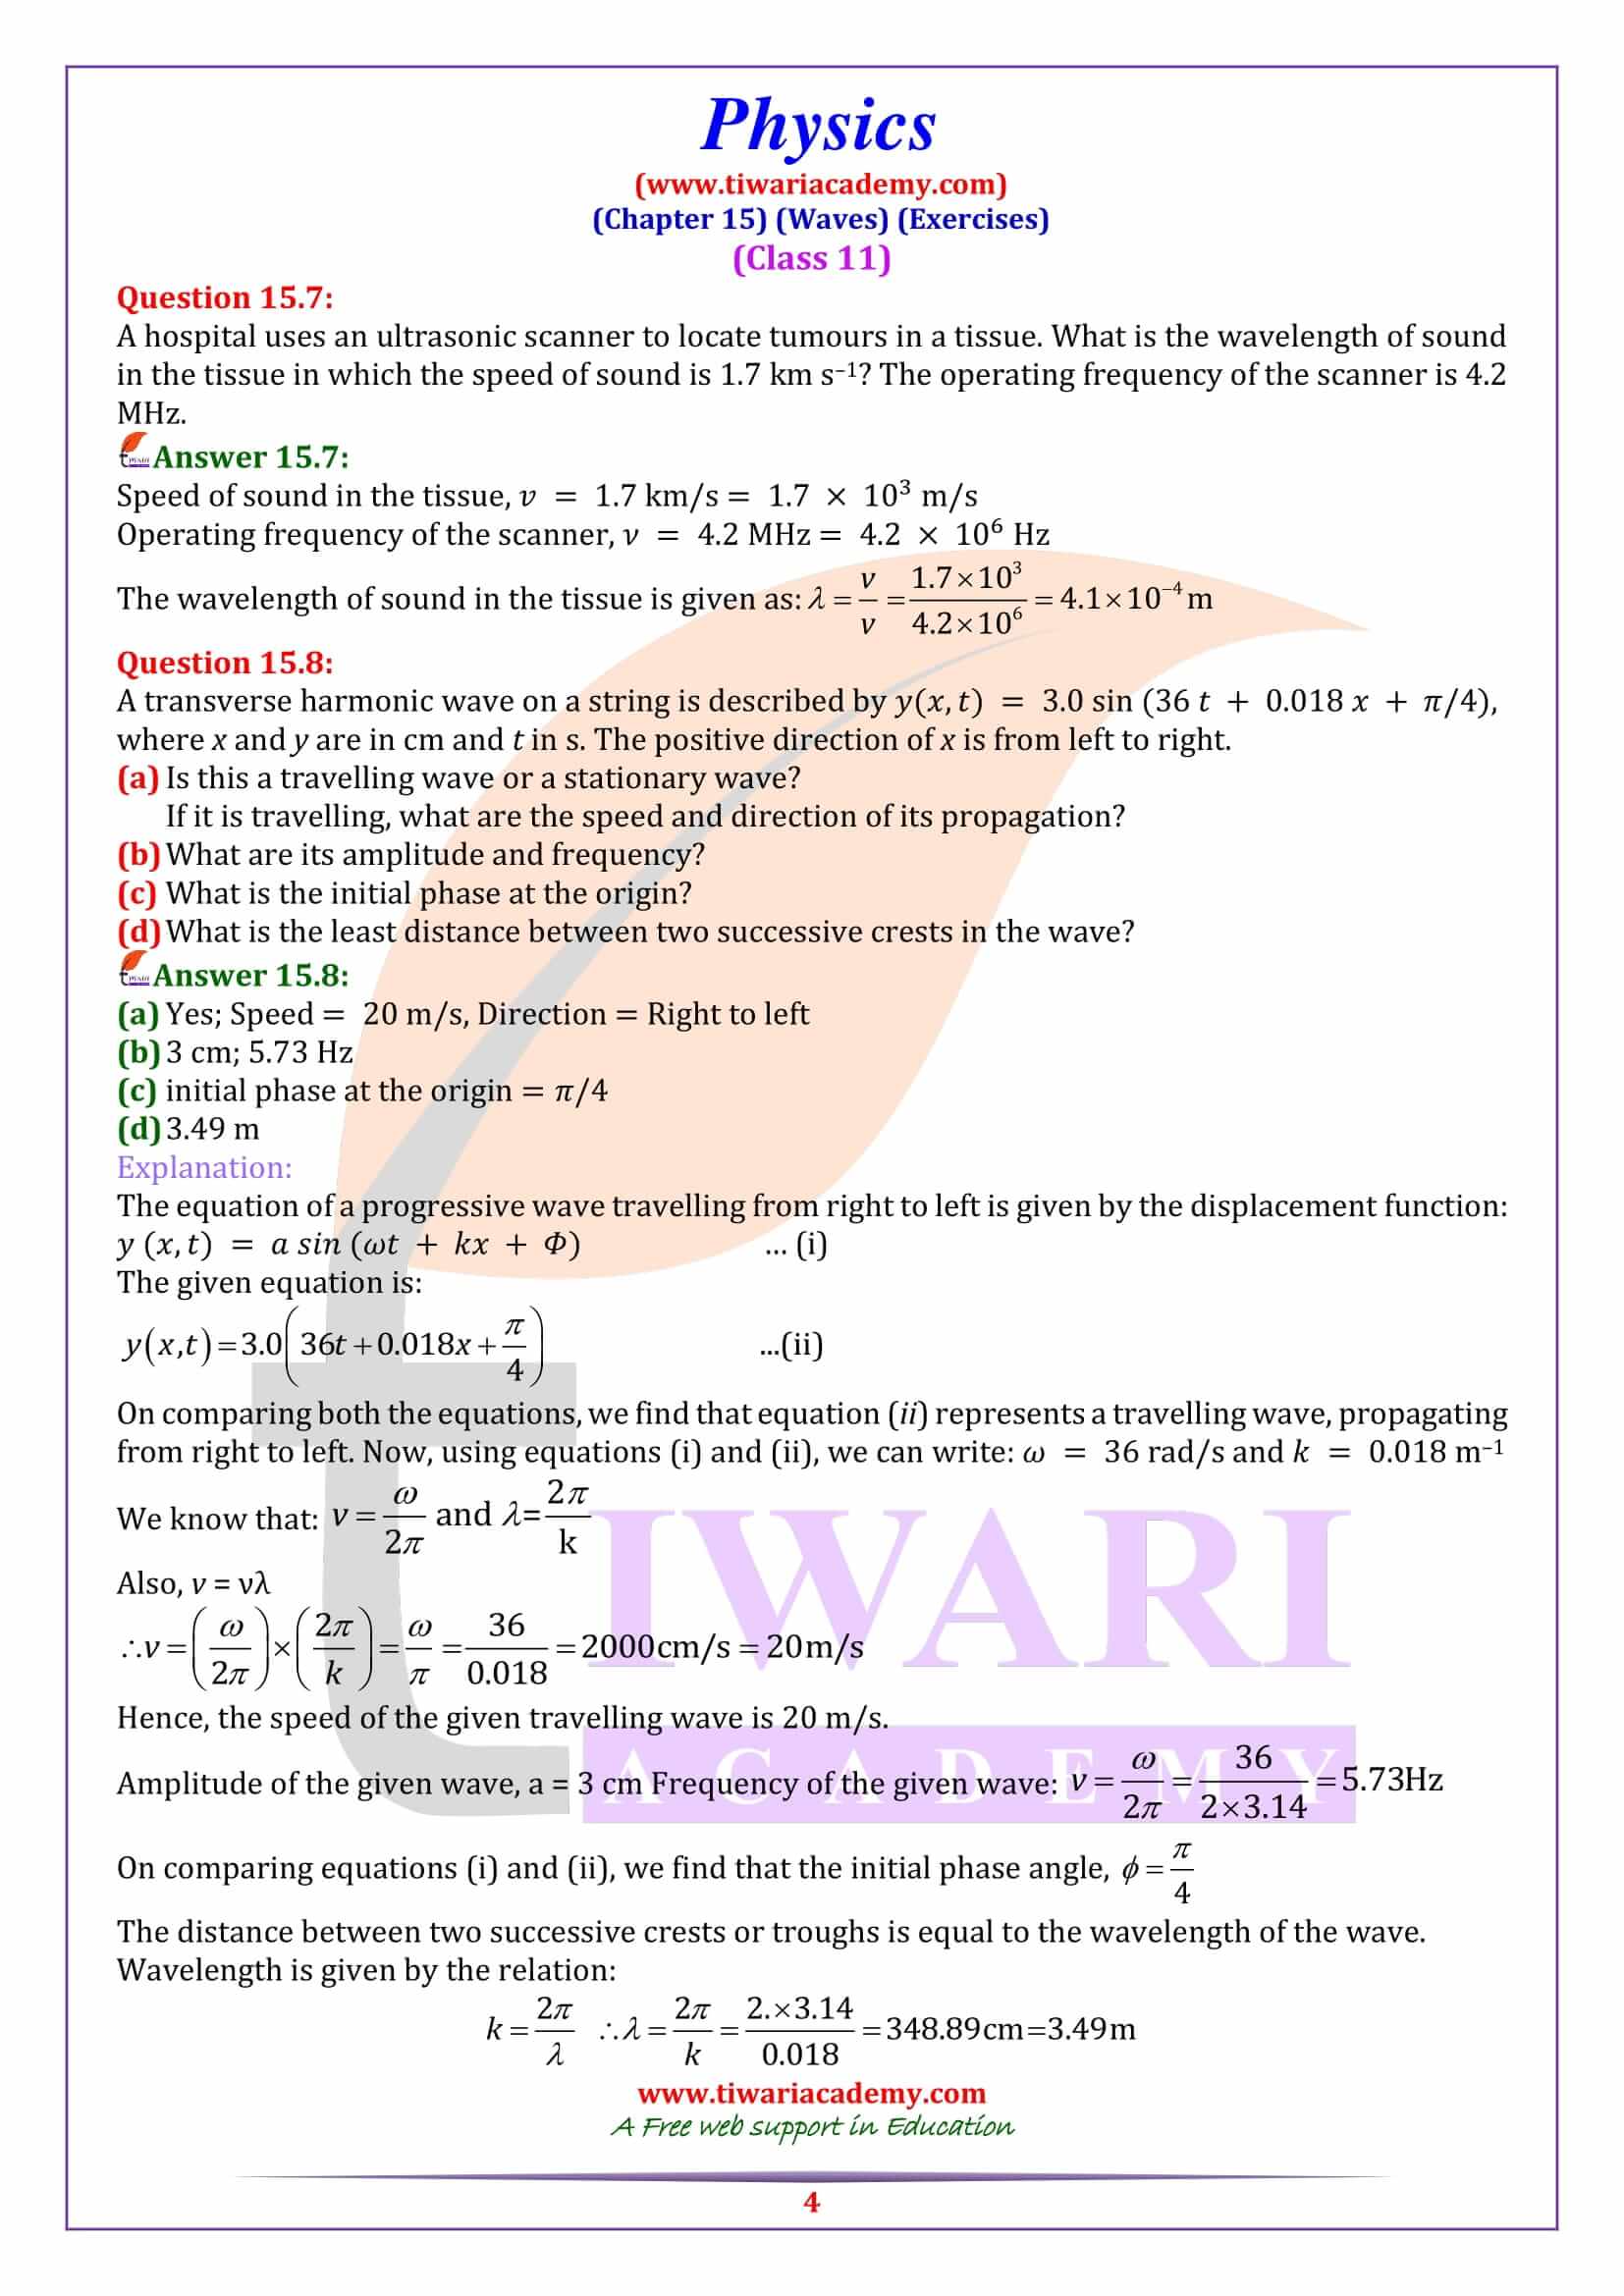 NCERT Solutions for Class 11 Physics Chapter 15 in PDF